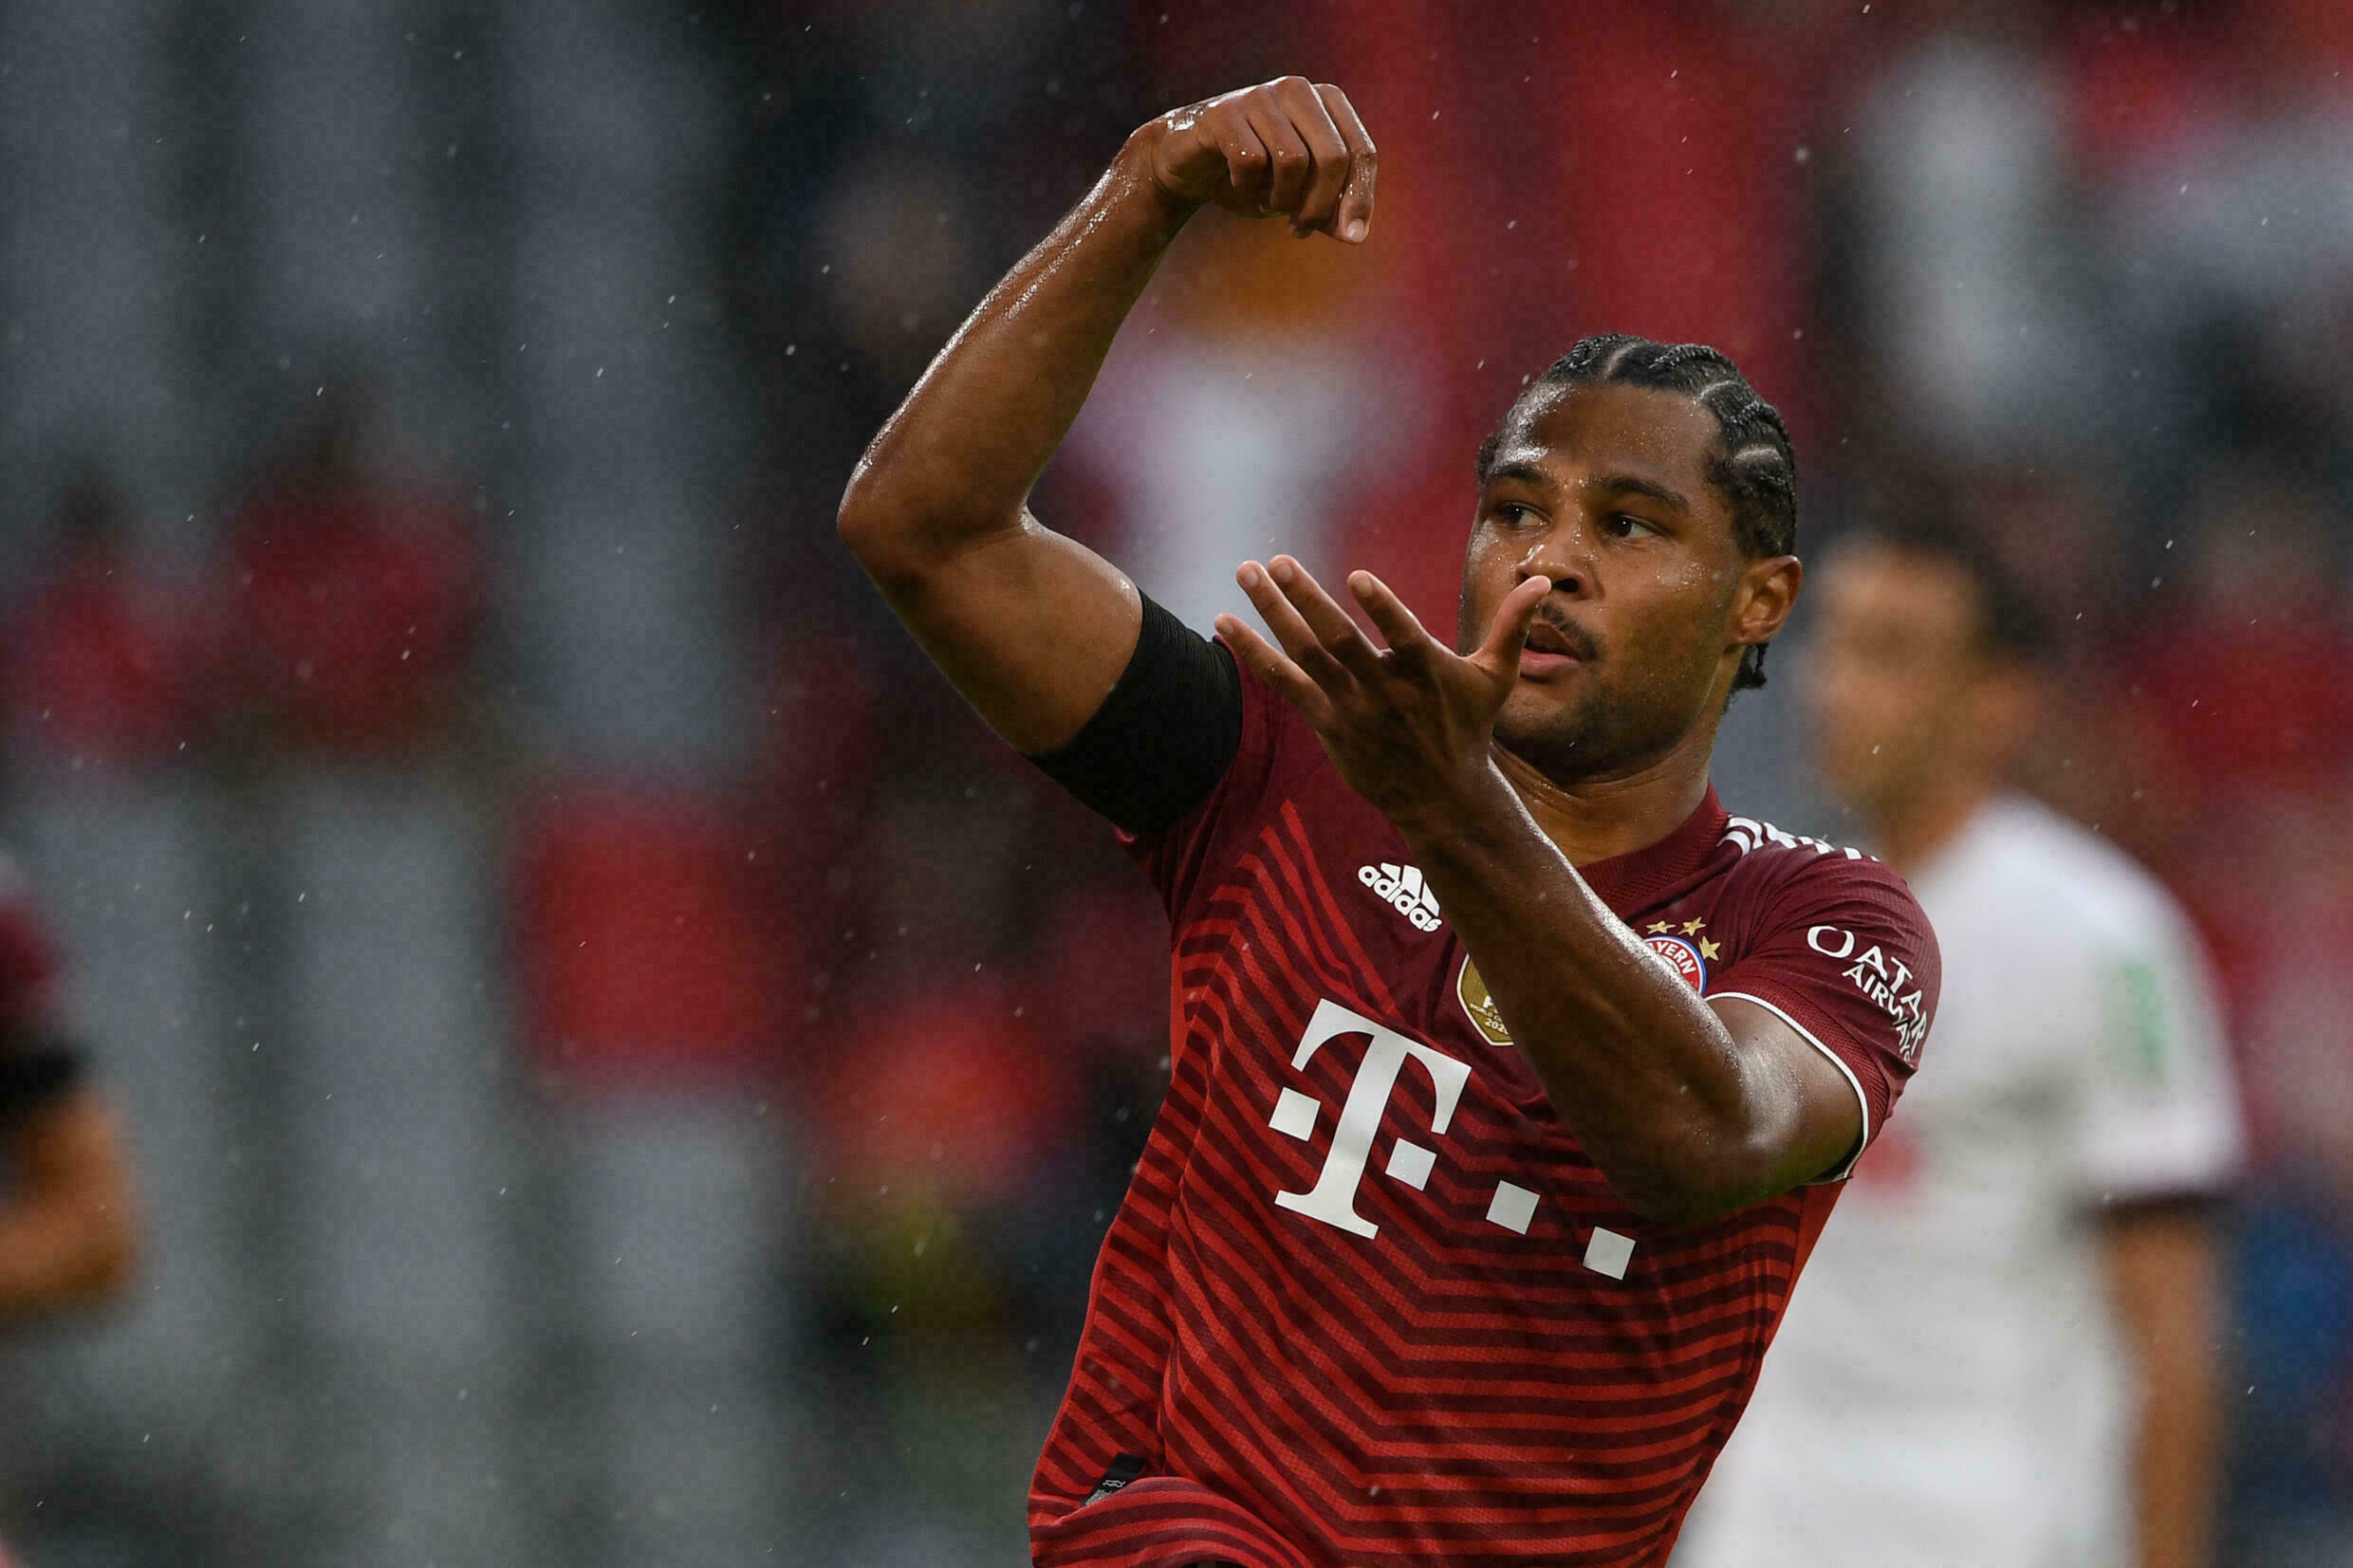 Gnabry scores twice as Bayern Munich squeeze past Cologne